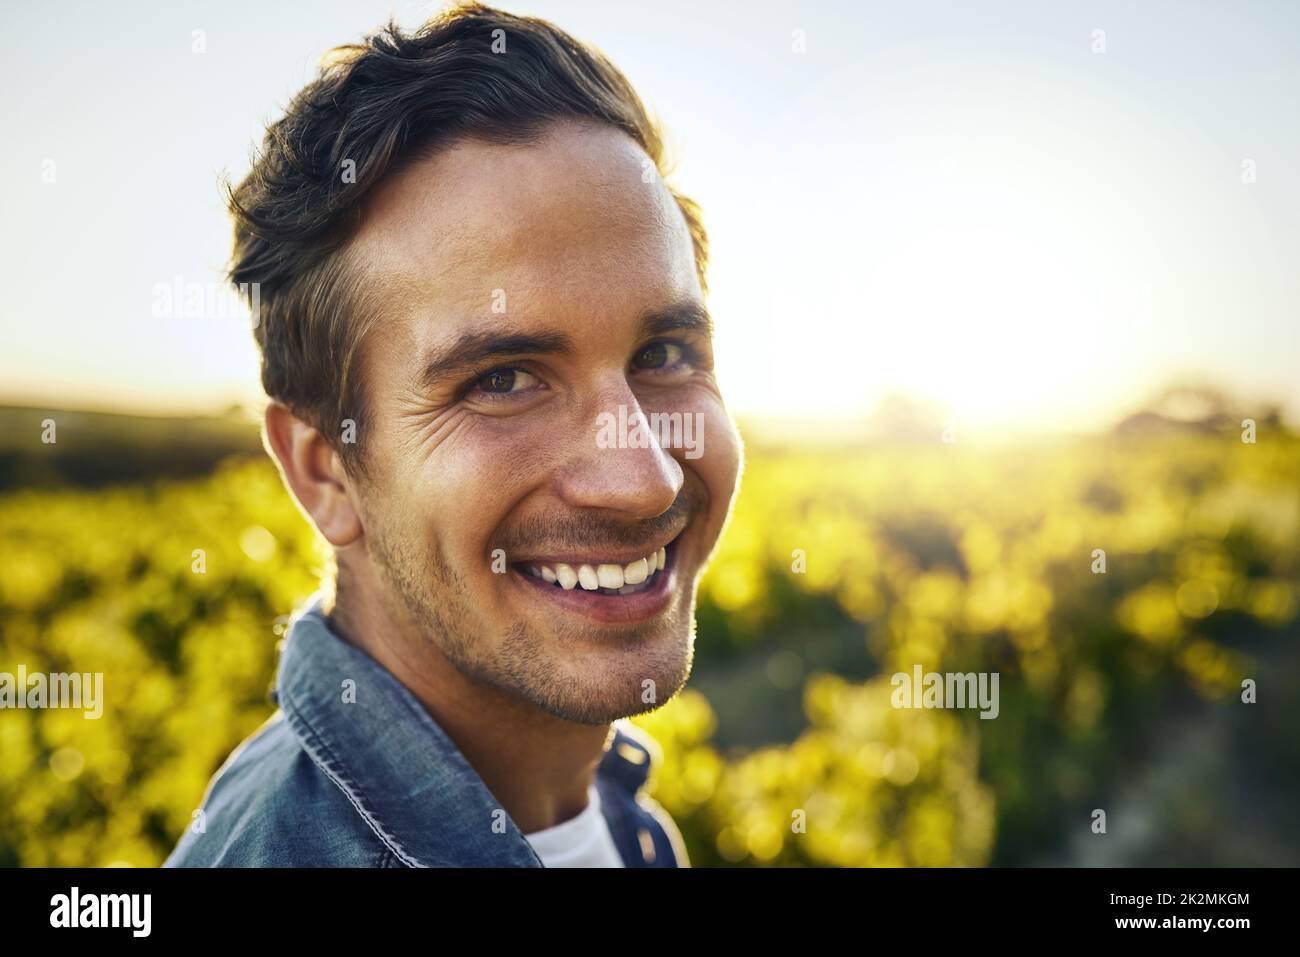 Its the season for some pickin. Portrait of a happy young man working on a farm. Stock Photo